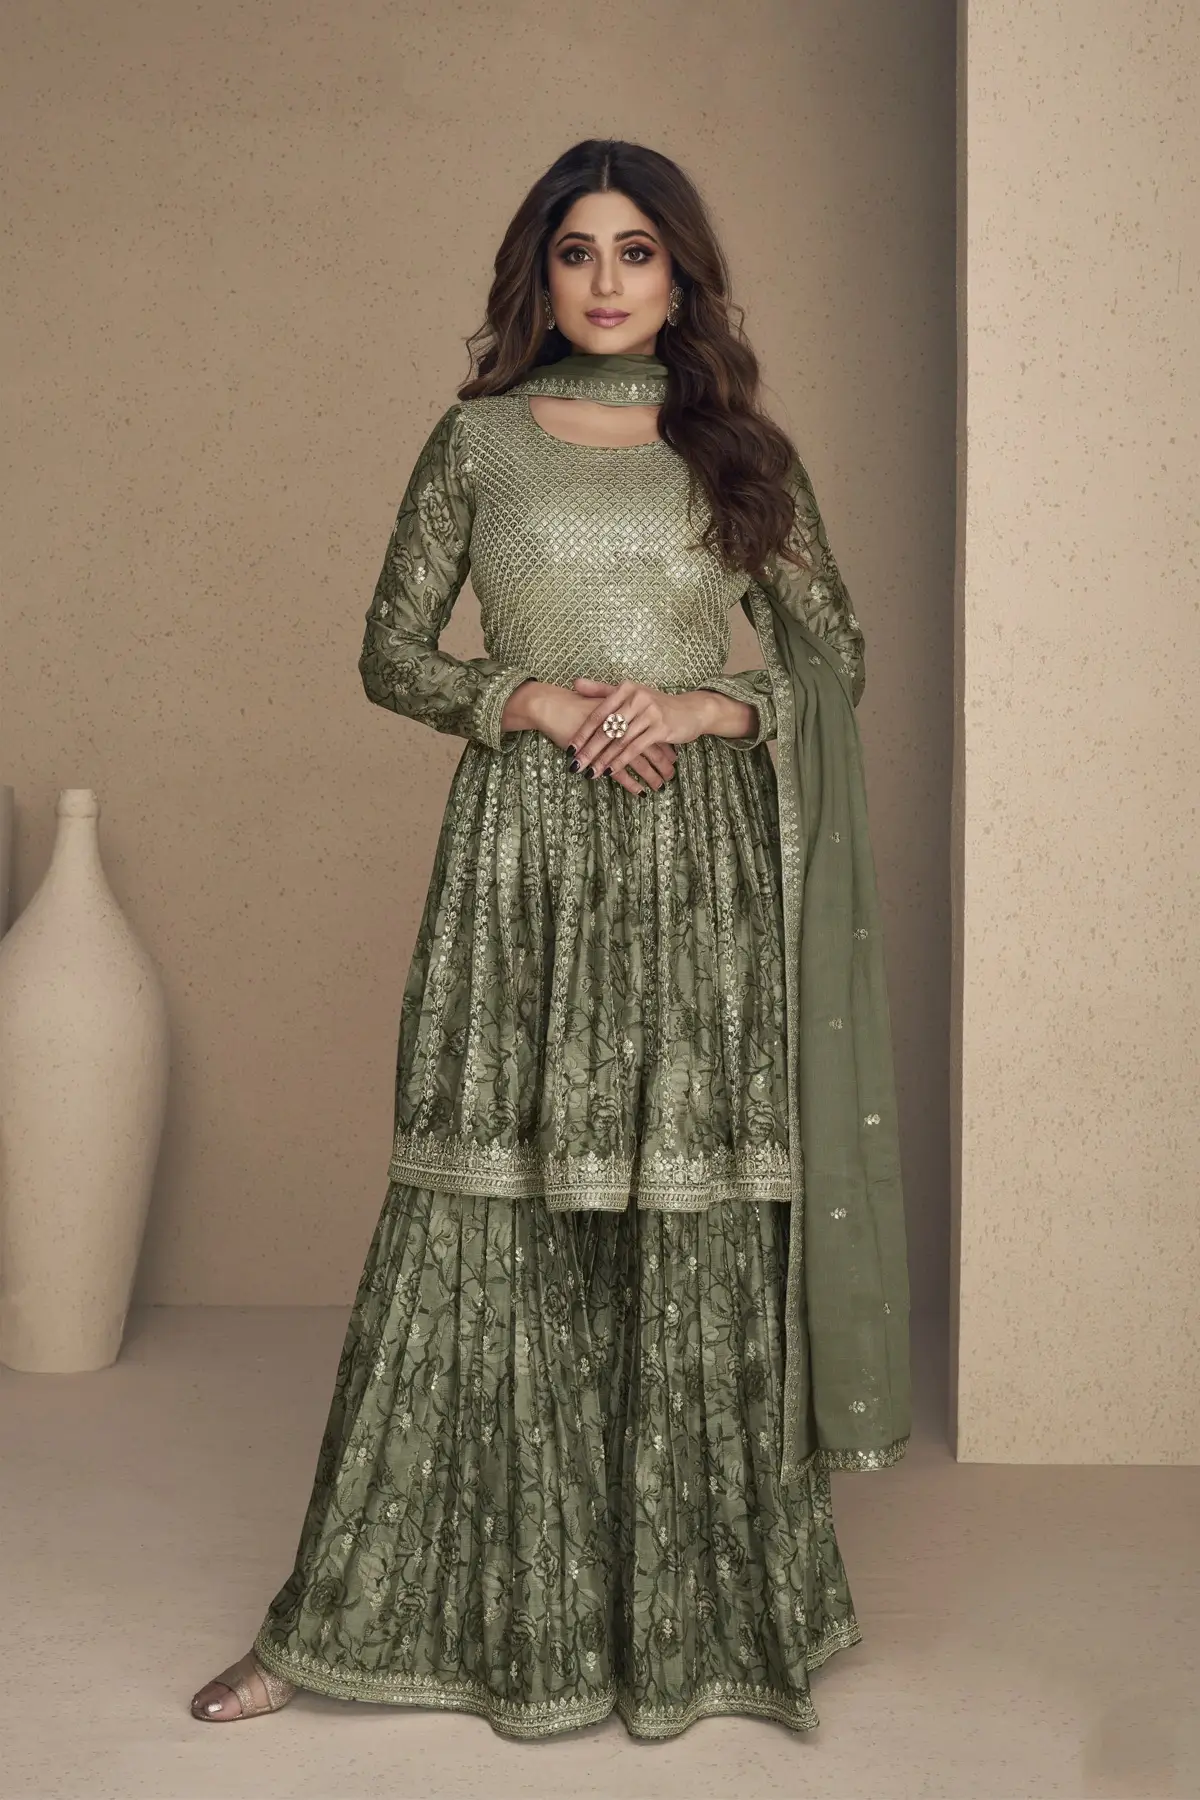 Palazzo Suit with Embroidered Shirt online in Canada USA UK Australia New Zealand France Mauritius